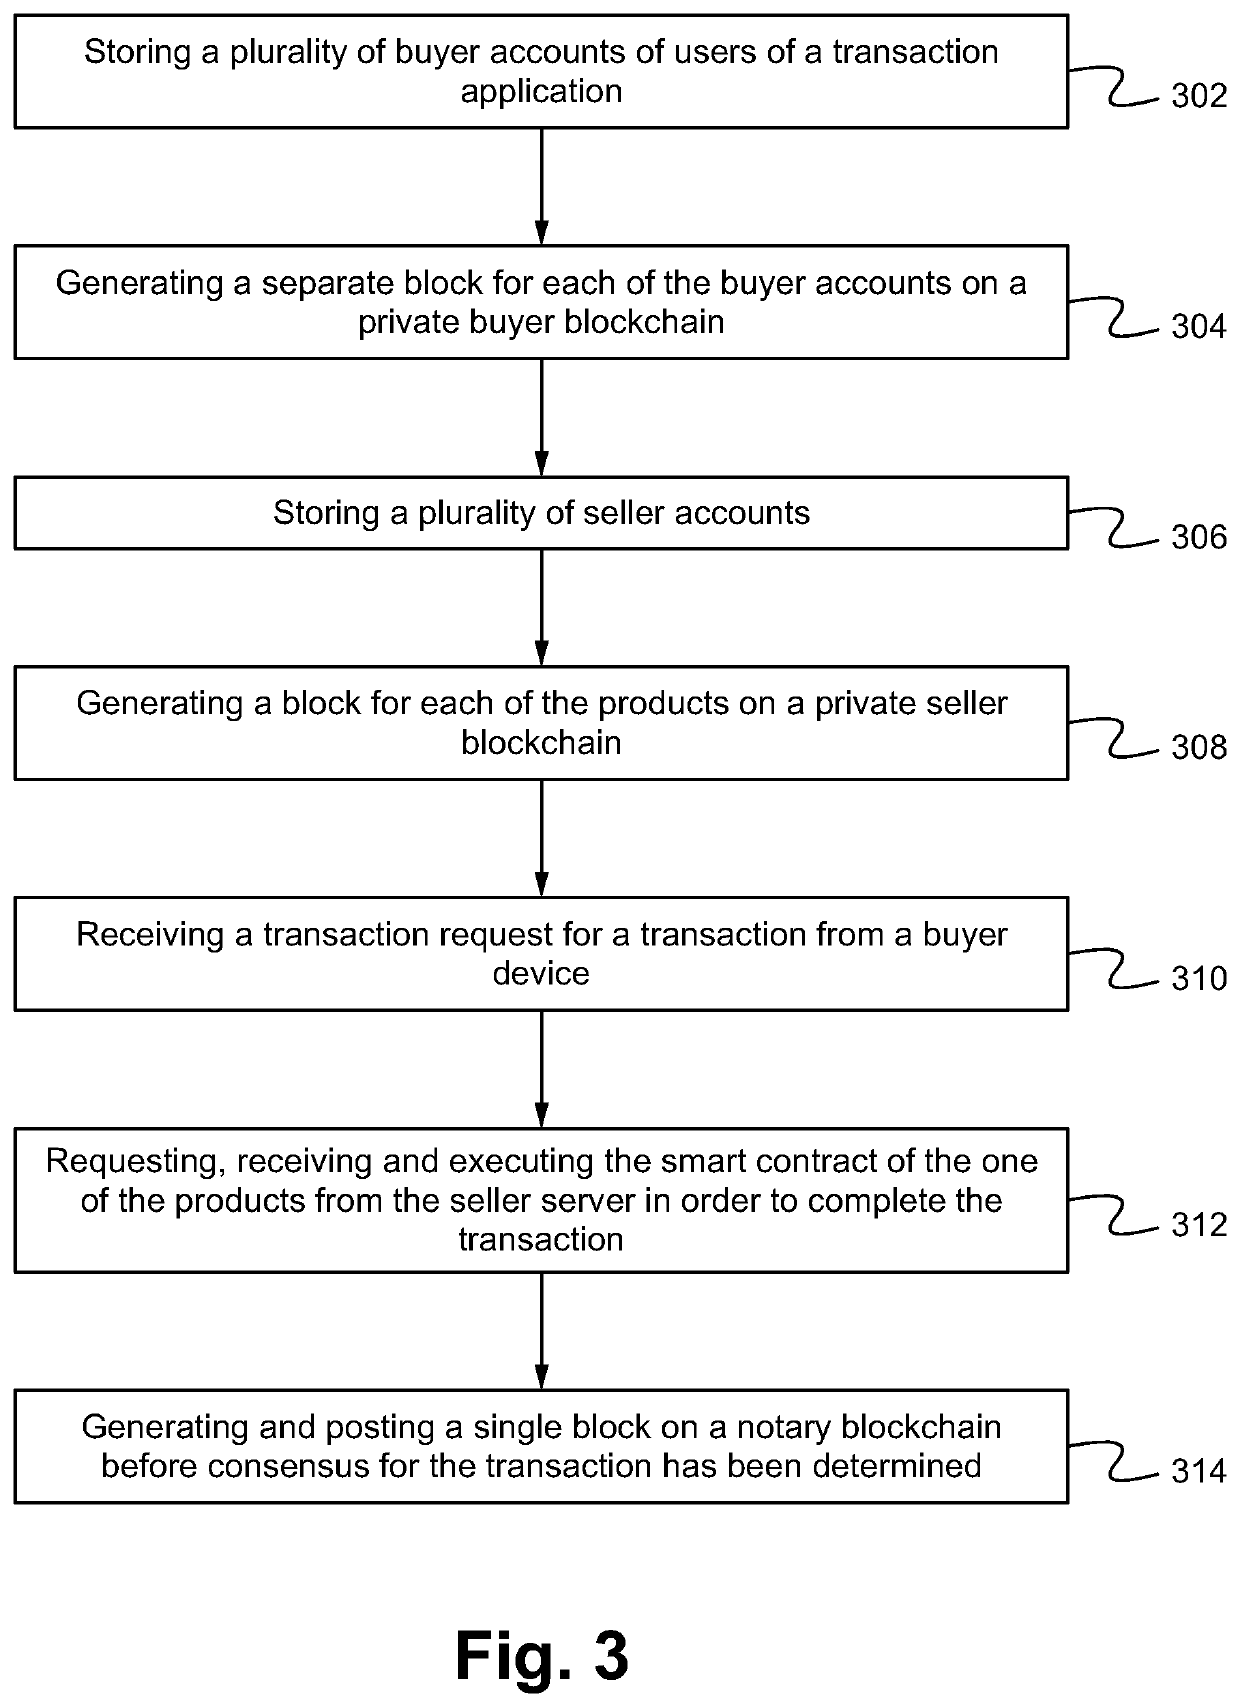 Novel blockchain architecture, system, method and device for automated cybersecurity and data privacy law compliance with proprietary off-chain storage mechanism